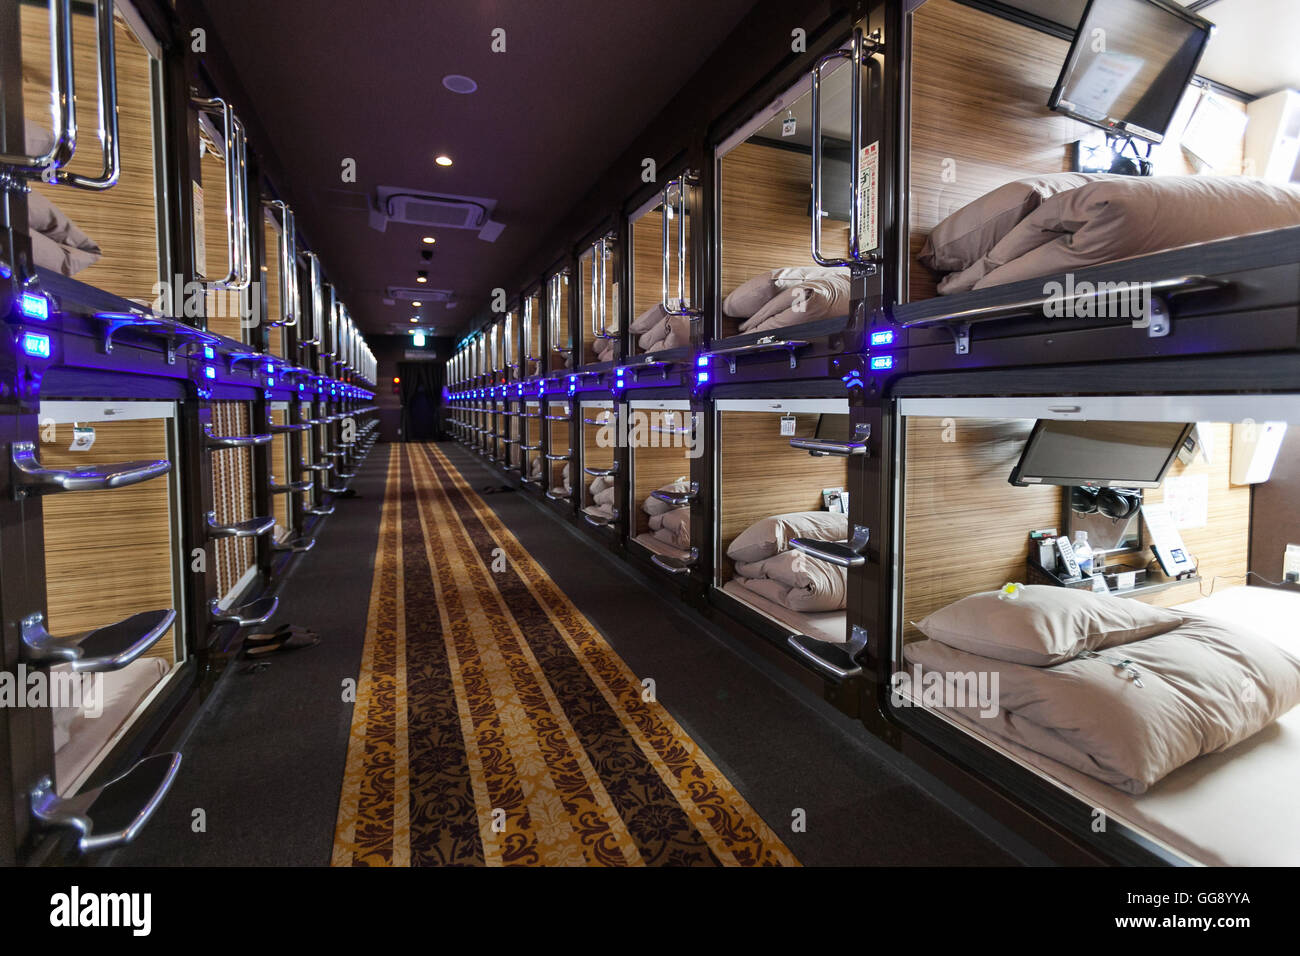 Anshin Oyado luxury capsule hotel located within 3-minutes of the busy Shinjuku station on August 7, 2016, Tokyo, Japan. The new take on the traditional Japanese capsule hotel offers larger capsules, free artificial hot springs & mist sauna, internet cafe and Wi-Fi. This hotel is male only and rates start at 5480 yen (54USD). Each of the hotel's 256 capsules is equipped with fire alarm, air conditioner, tablet computer and flat-screen TV. Public areas such as the hot springs bath, laundromat, clothing shop and snack and drinks vending machines are open 24 hours. The hotel's website is in Chine Stock Photo